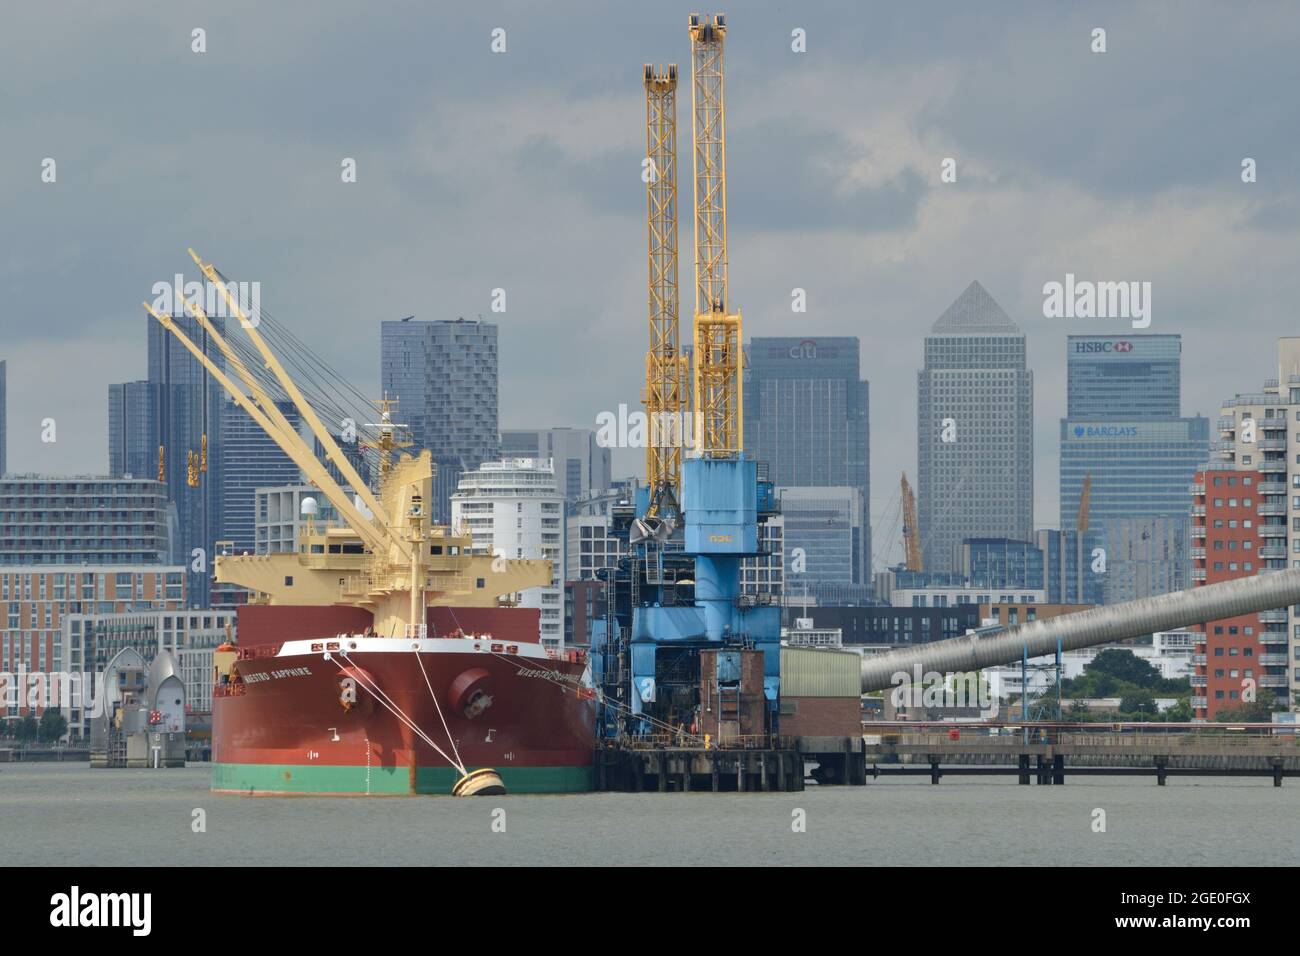 Cargo Ship Maestro Sapphire unloading raw sugarcane at the Tate & Lyle Sugar Thames Refinery wharf on the River Thames at Silvertown, London Stock Photo